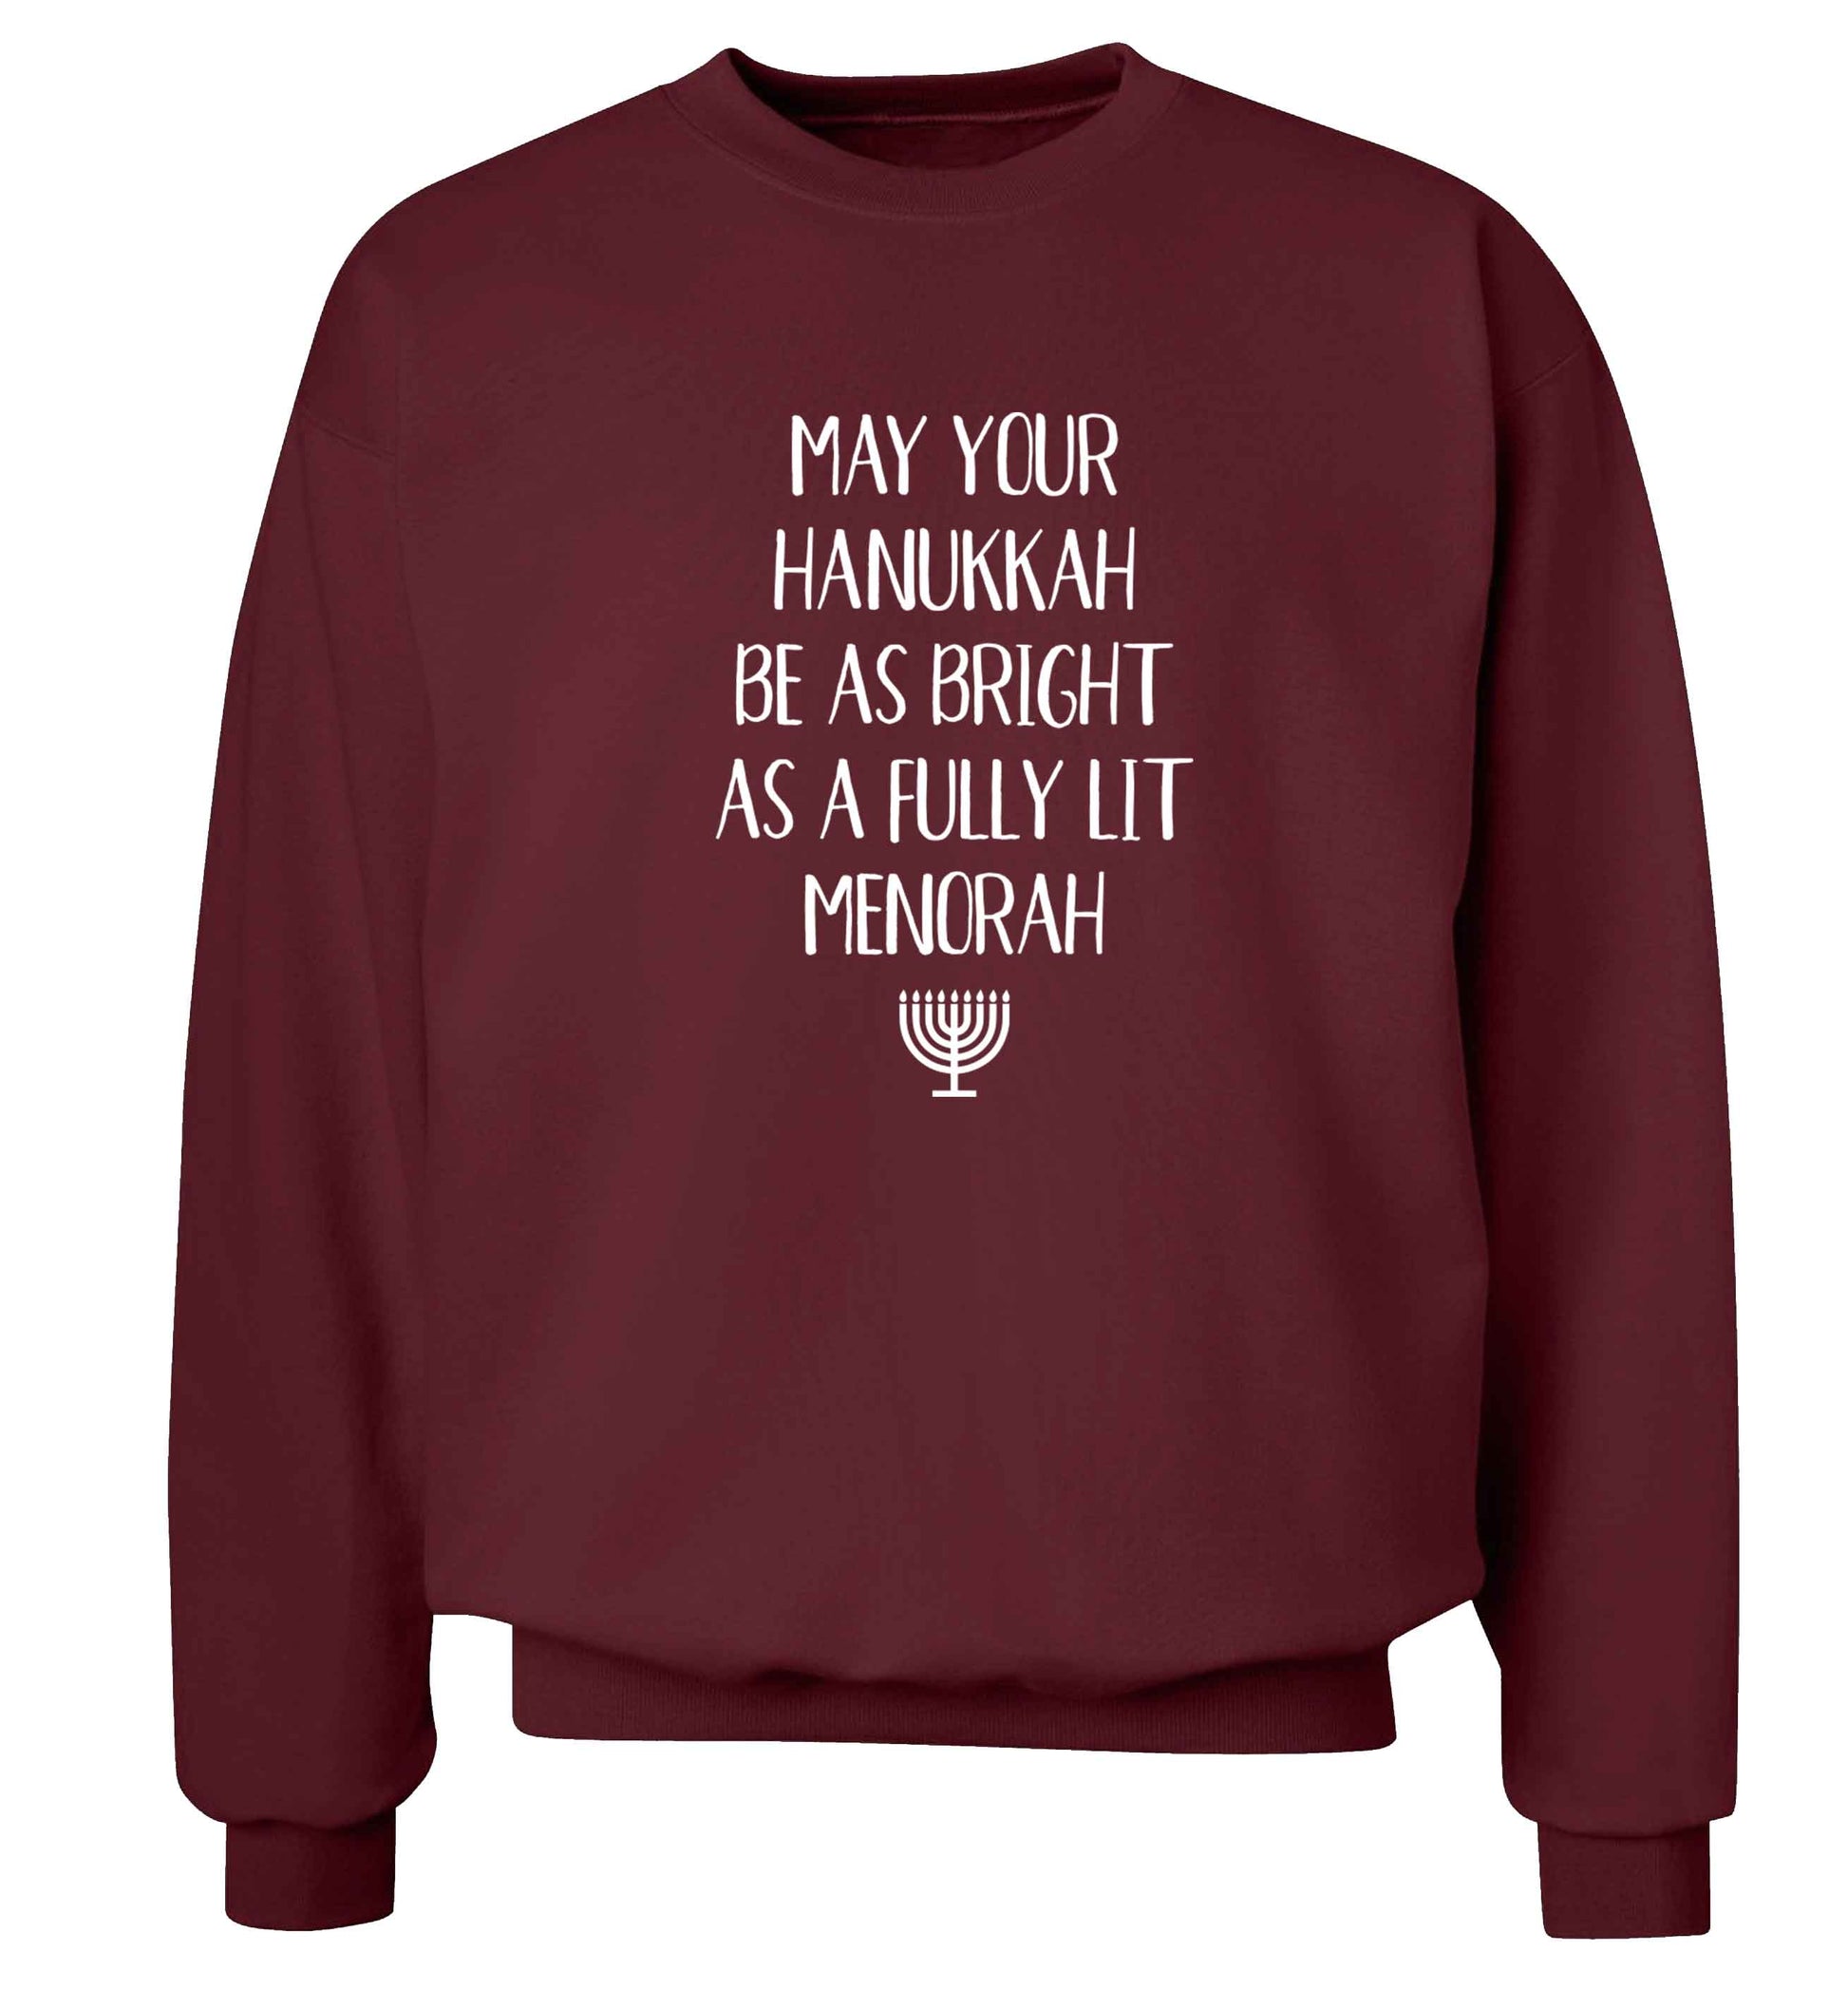 May your hanukkah be as bright as a fully lit menorah Adult's unisex maroon Sweater 2XL